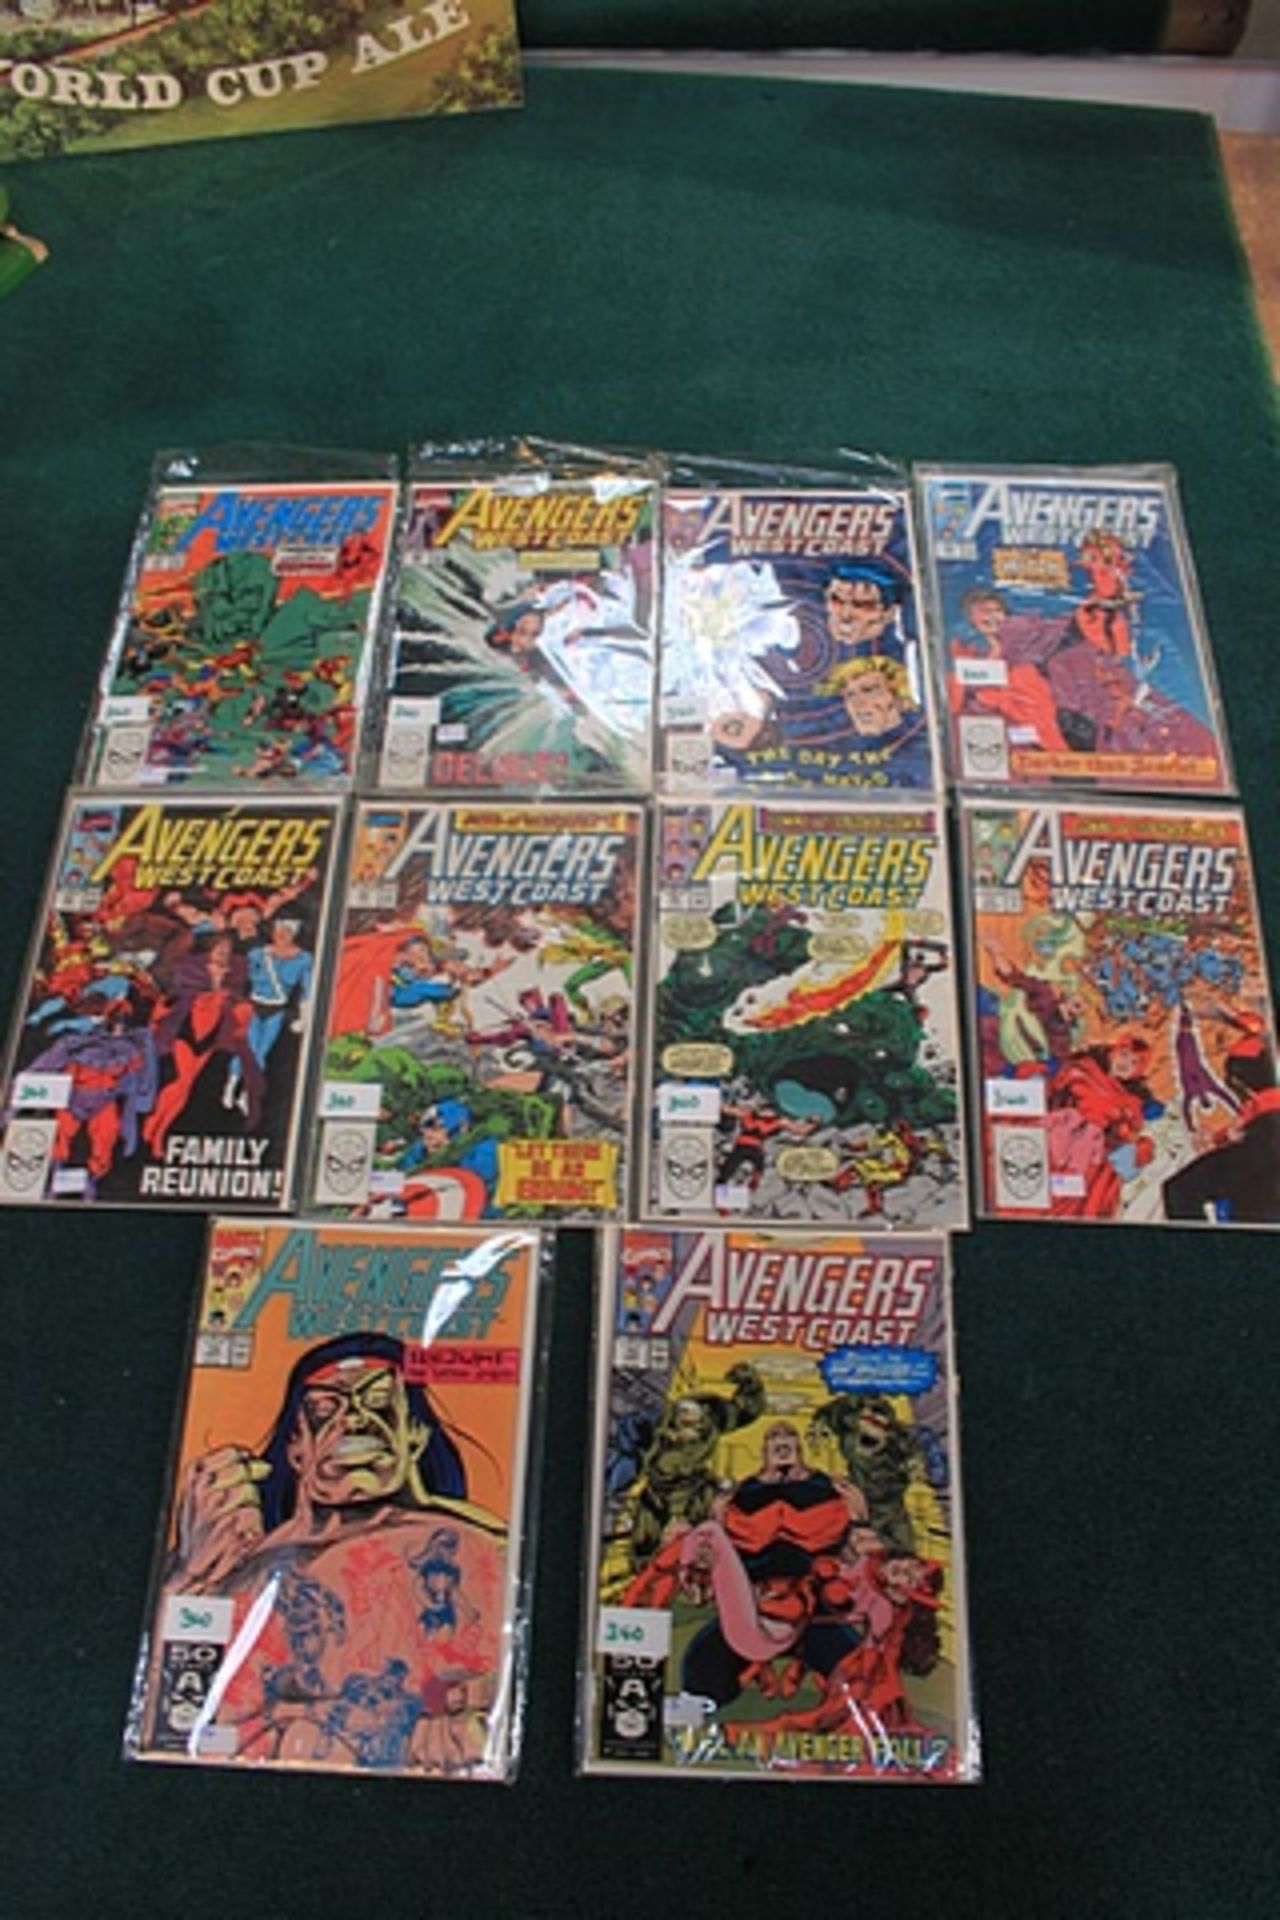 10 x issues Marvel Comic Avengers Demonica Rising #73 Aug-91 Chaos And Chysanthemums #72 Jul-91